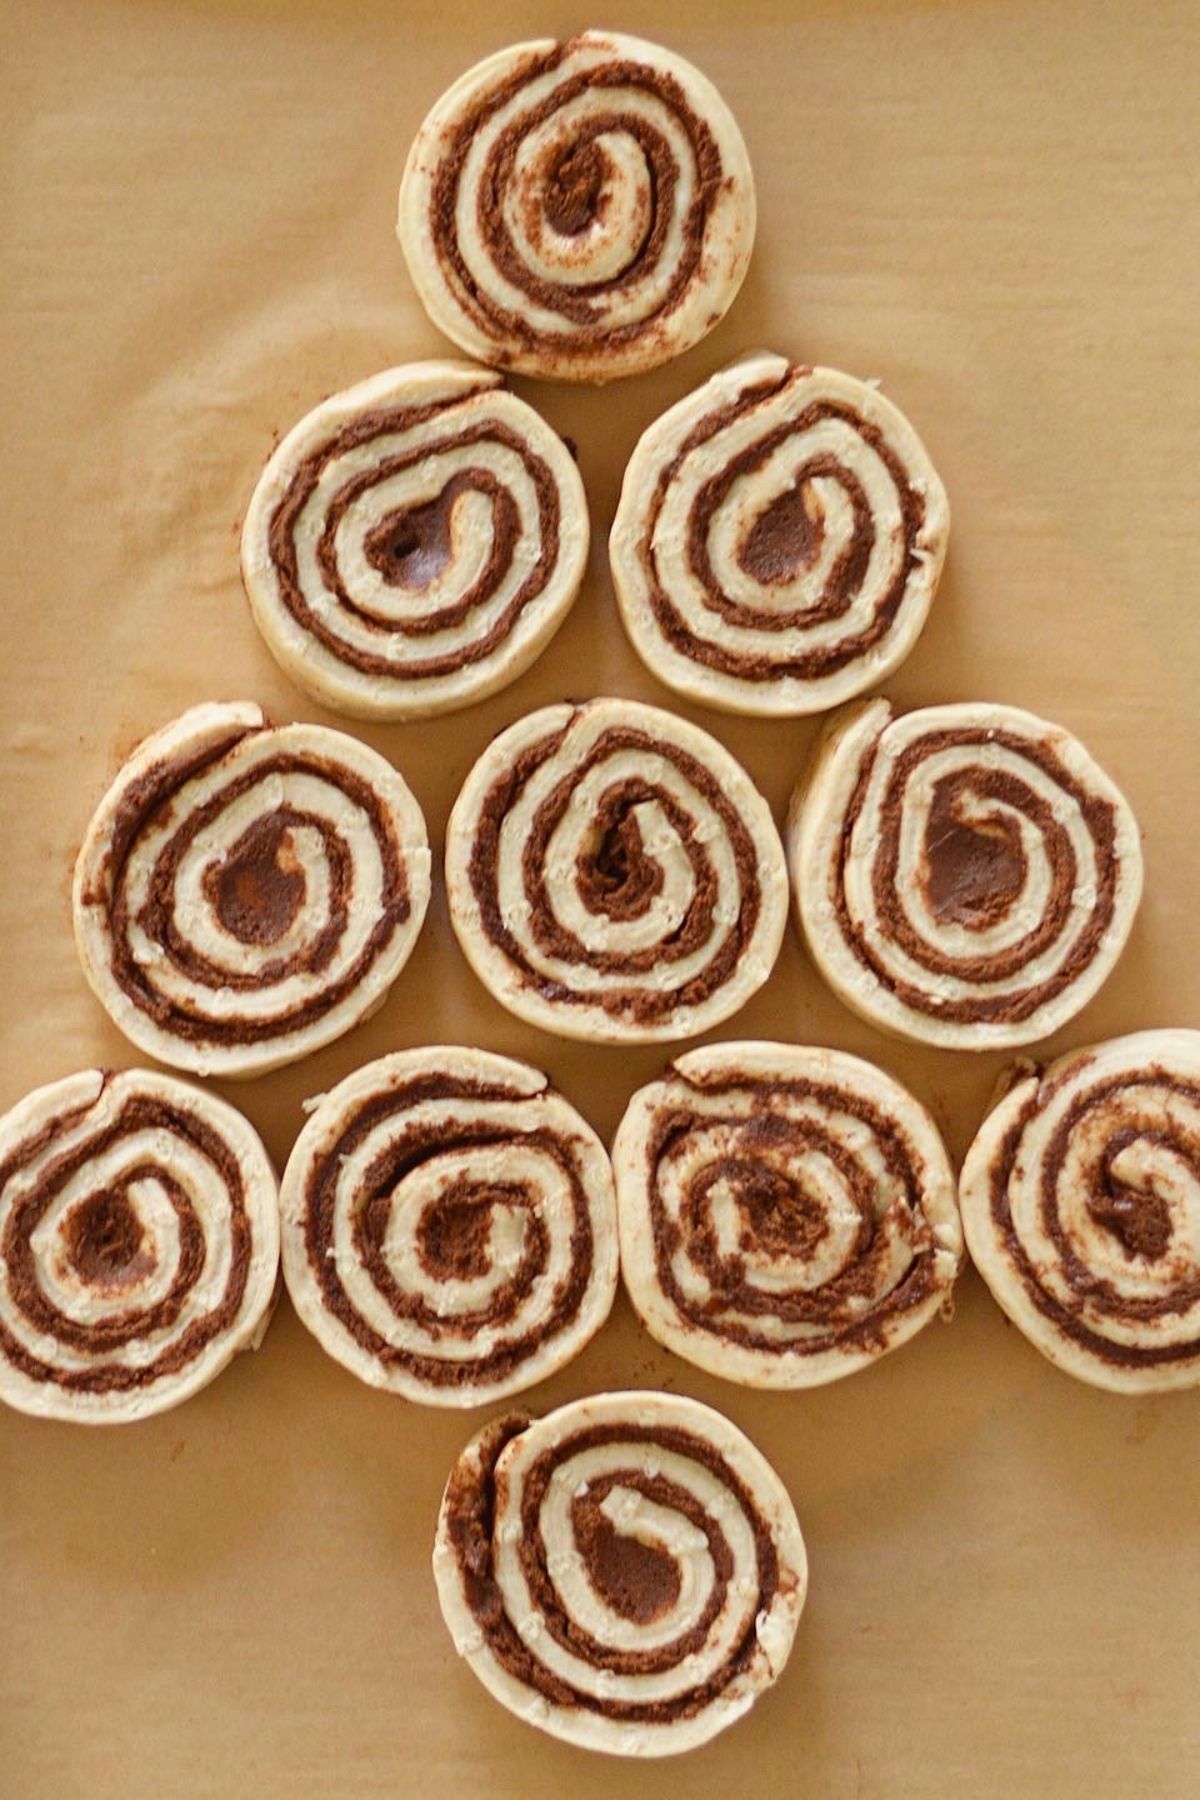 This Mickey cinnamon roll Christmas is the best treat to serve on Christmas morning.  Made with store bought cinnamon rolls and decorated with Mickey shaped string lights.  